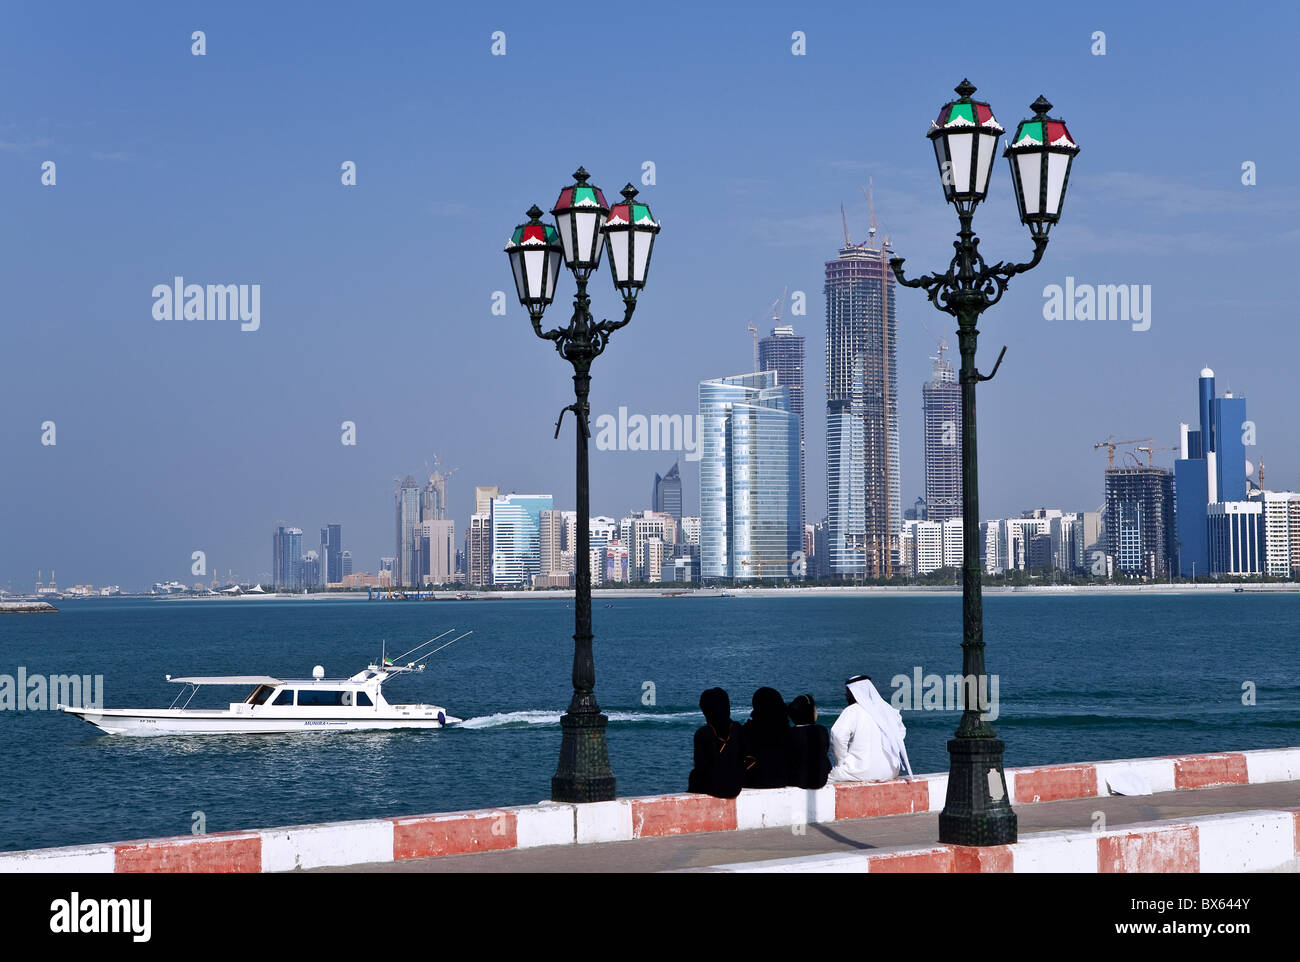 City skyline and the famous Corniche looking across the harbour from a pier, Abu Dhabi, United Arab Emirates, Middle East Stock Photo